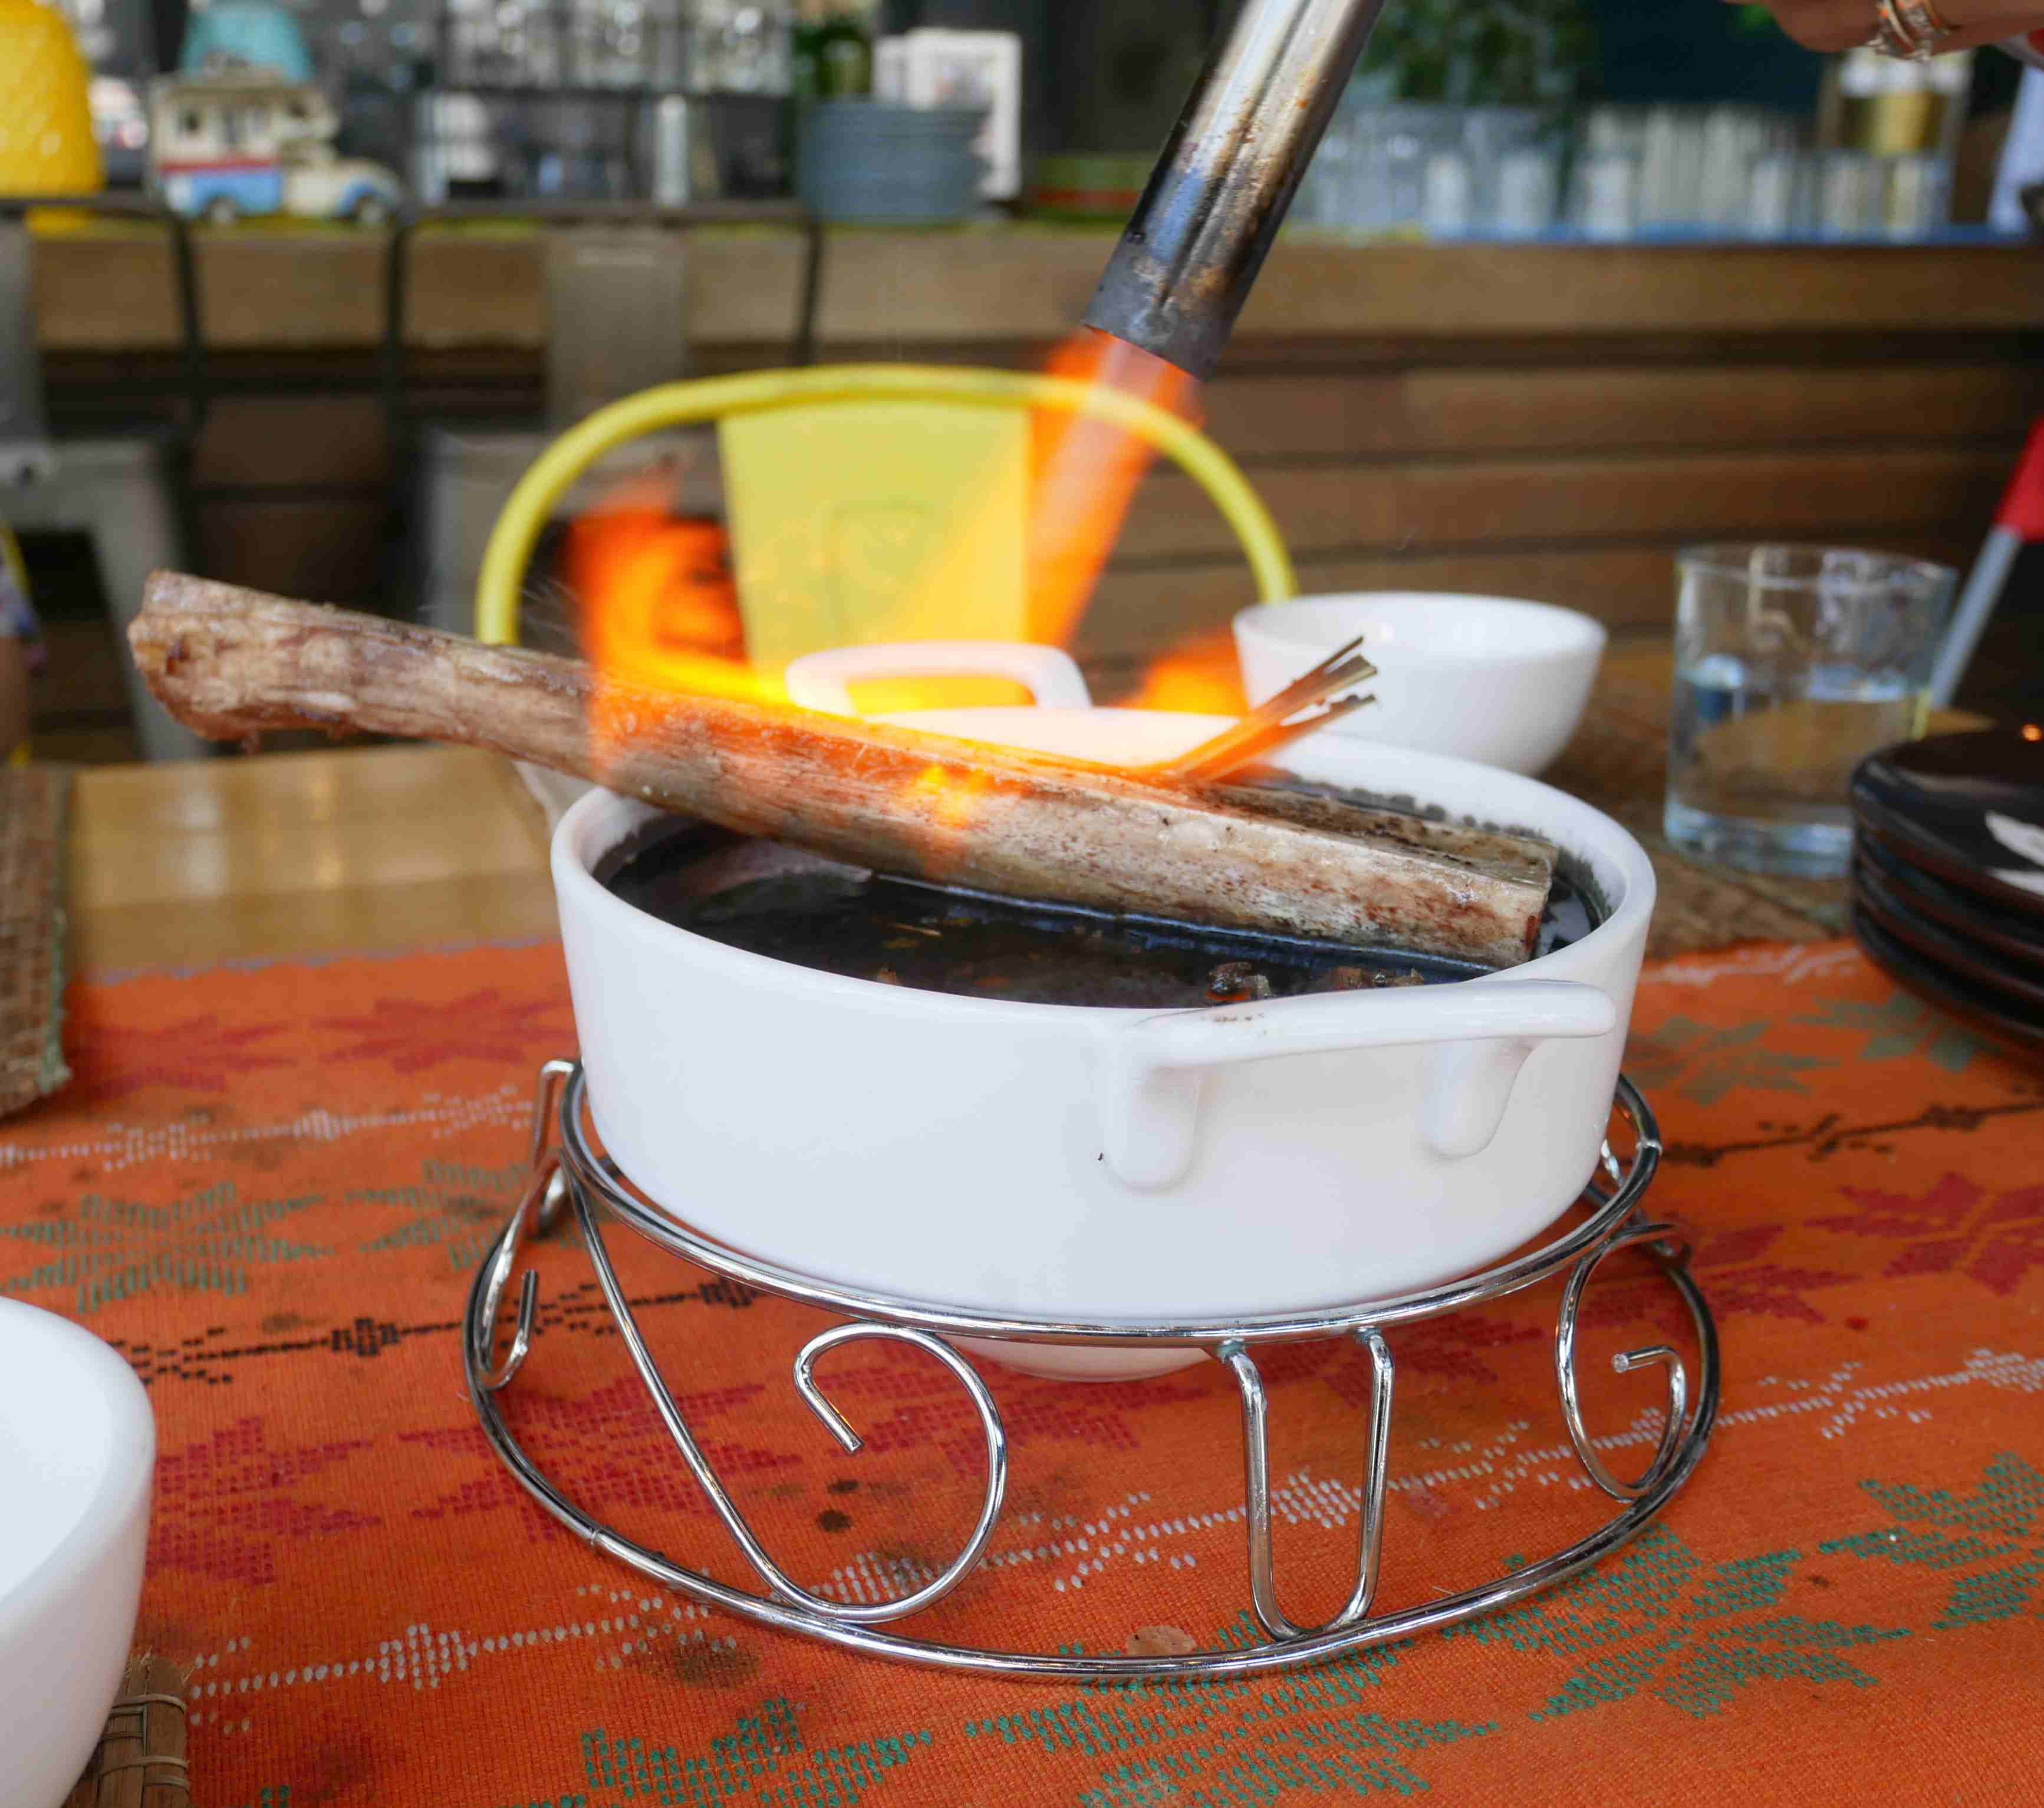 Bone marrow being torched before it was served. Photo: Rachel Malaguit